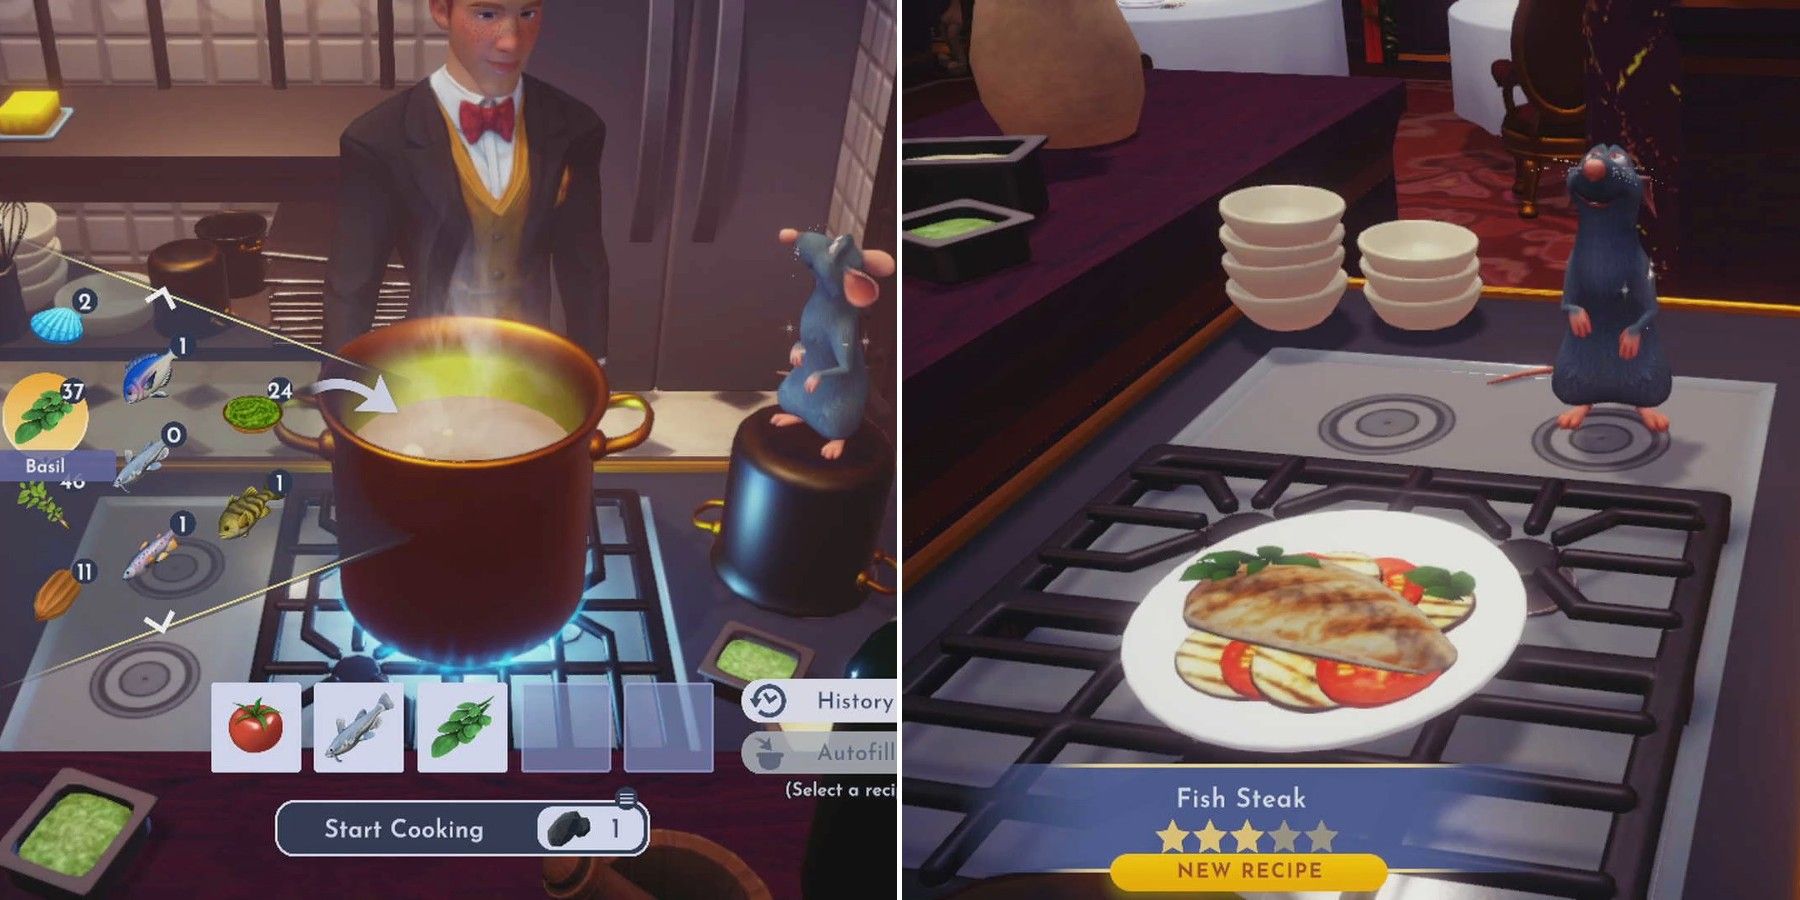 How to Make Delicious Fish Steak in Disney Dreamlight Valley